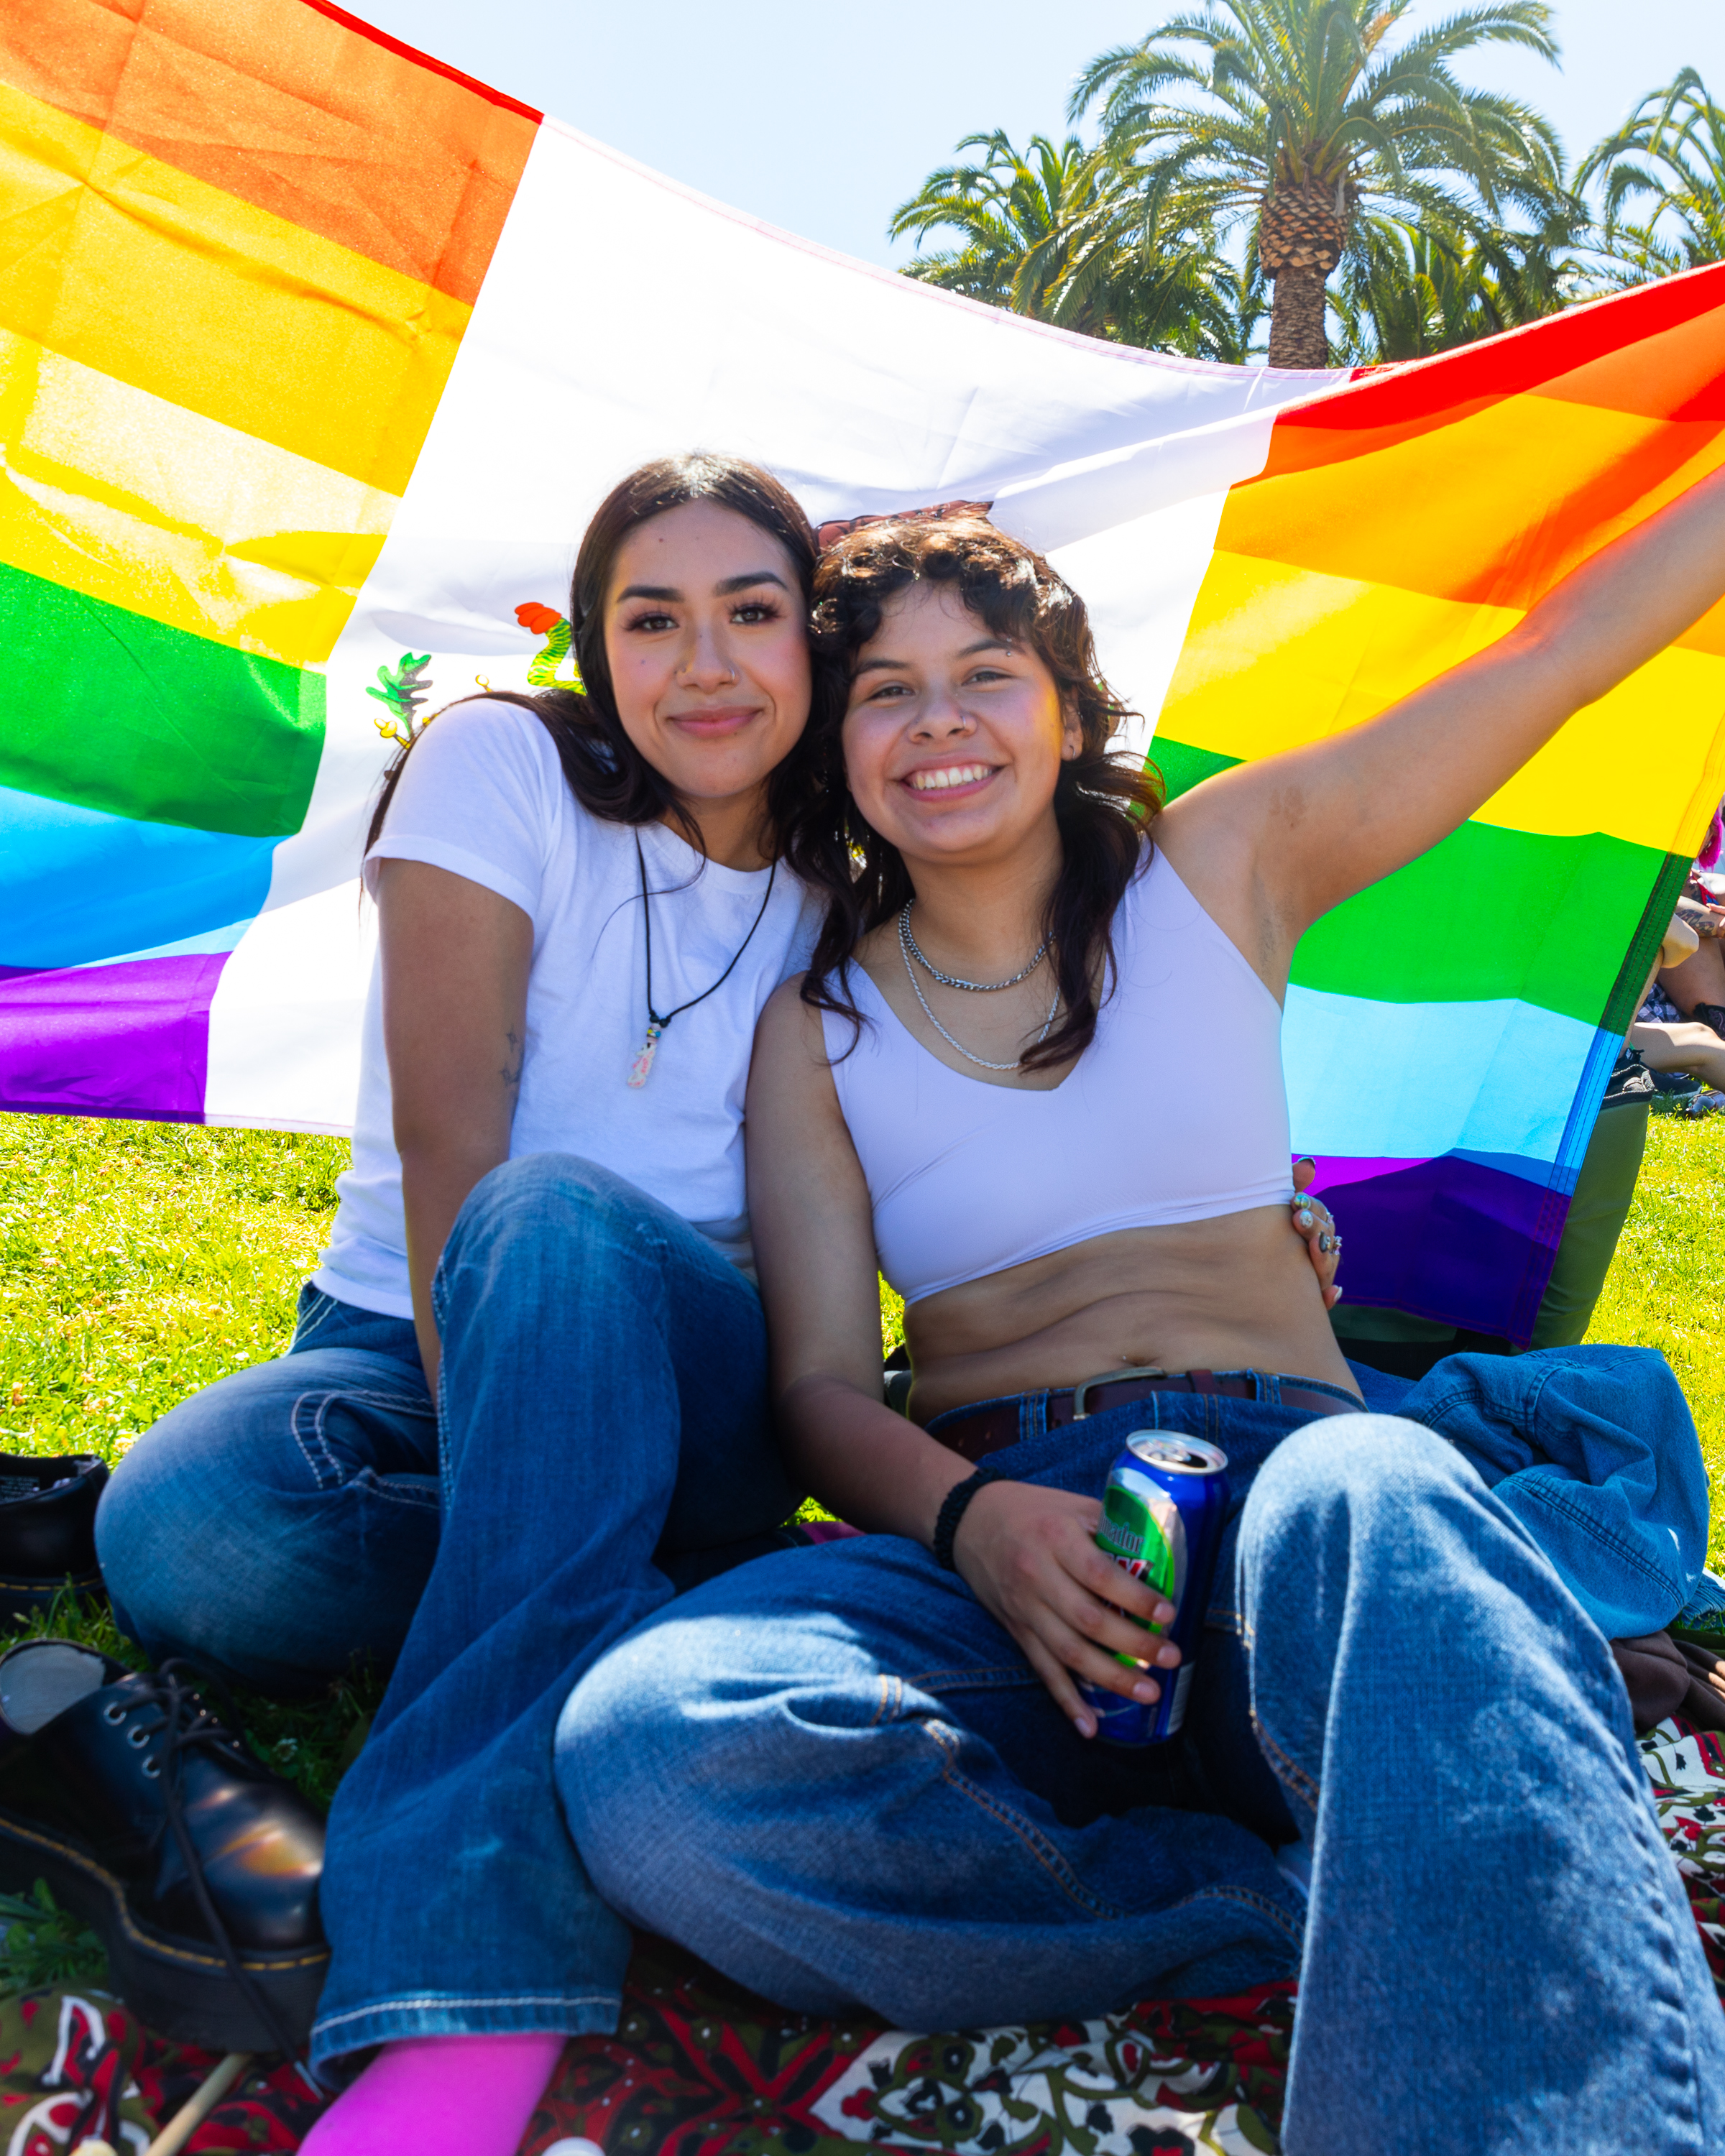 Two people sit on grass with a rainbow flag behind them, one holding a can. They are smiling, dressed casually, and palm trees are visible in the background.